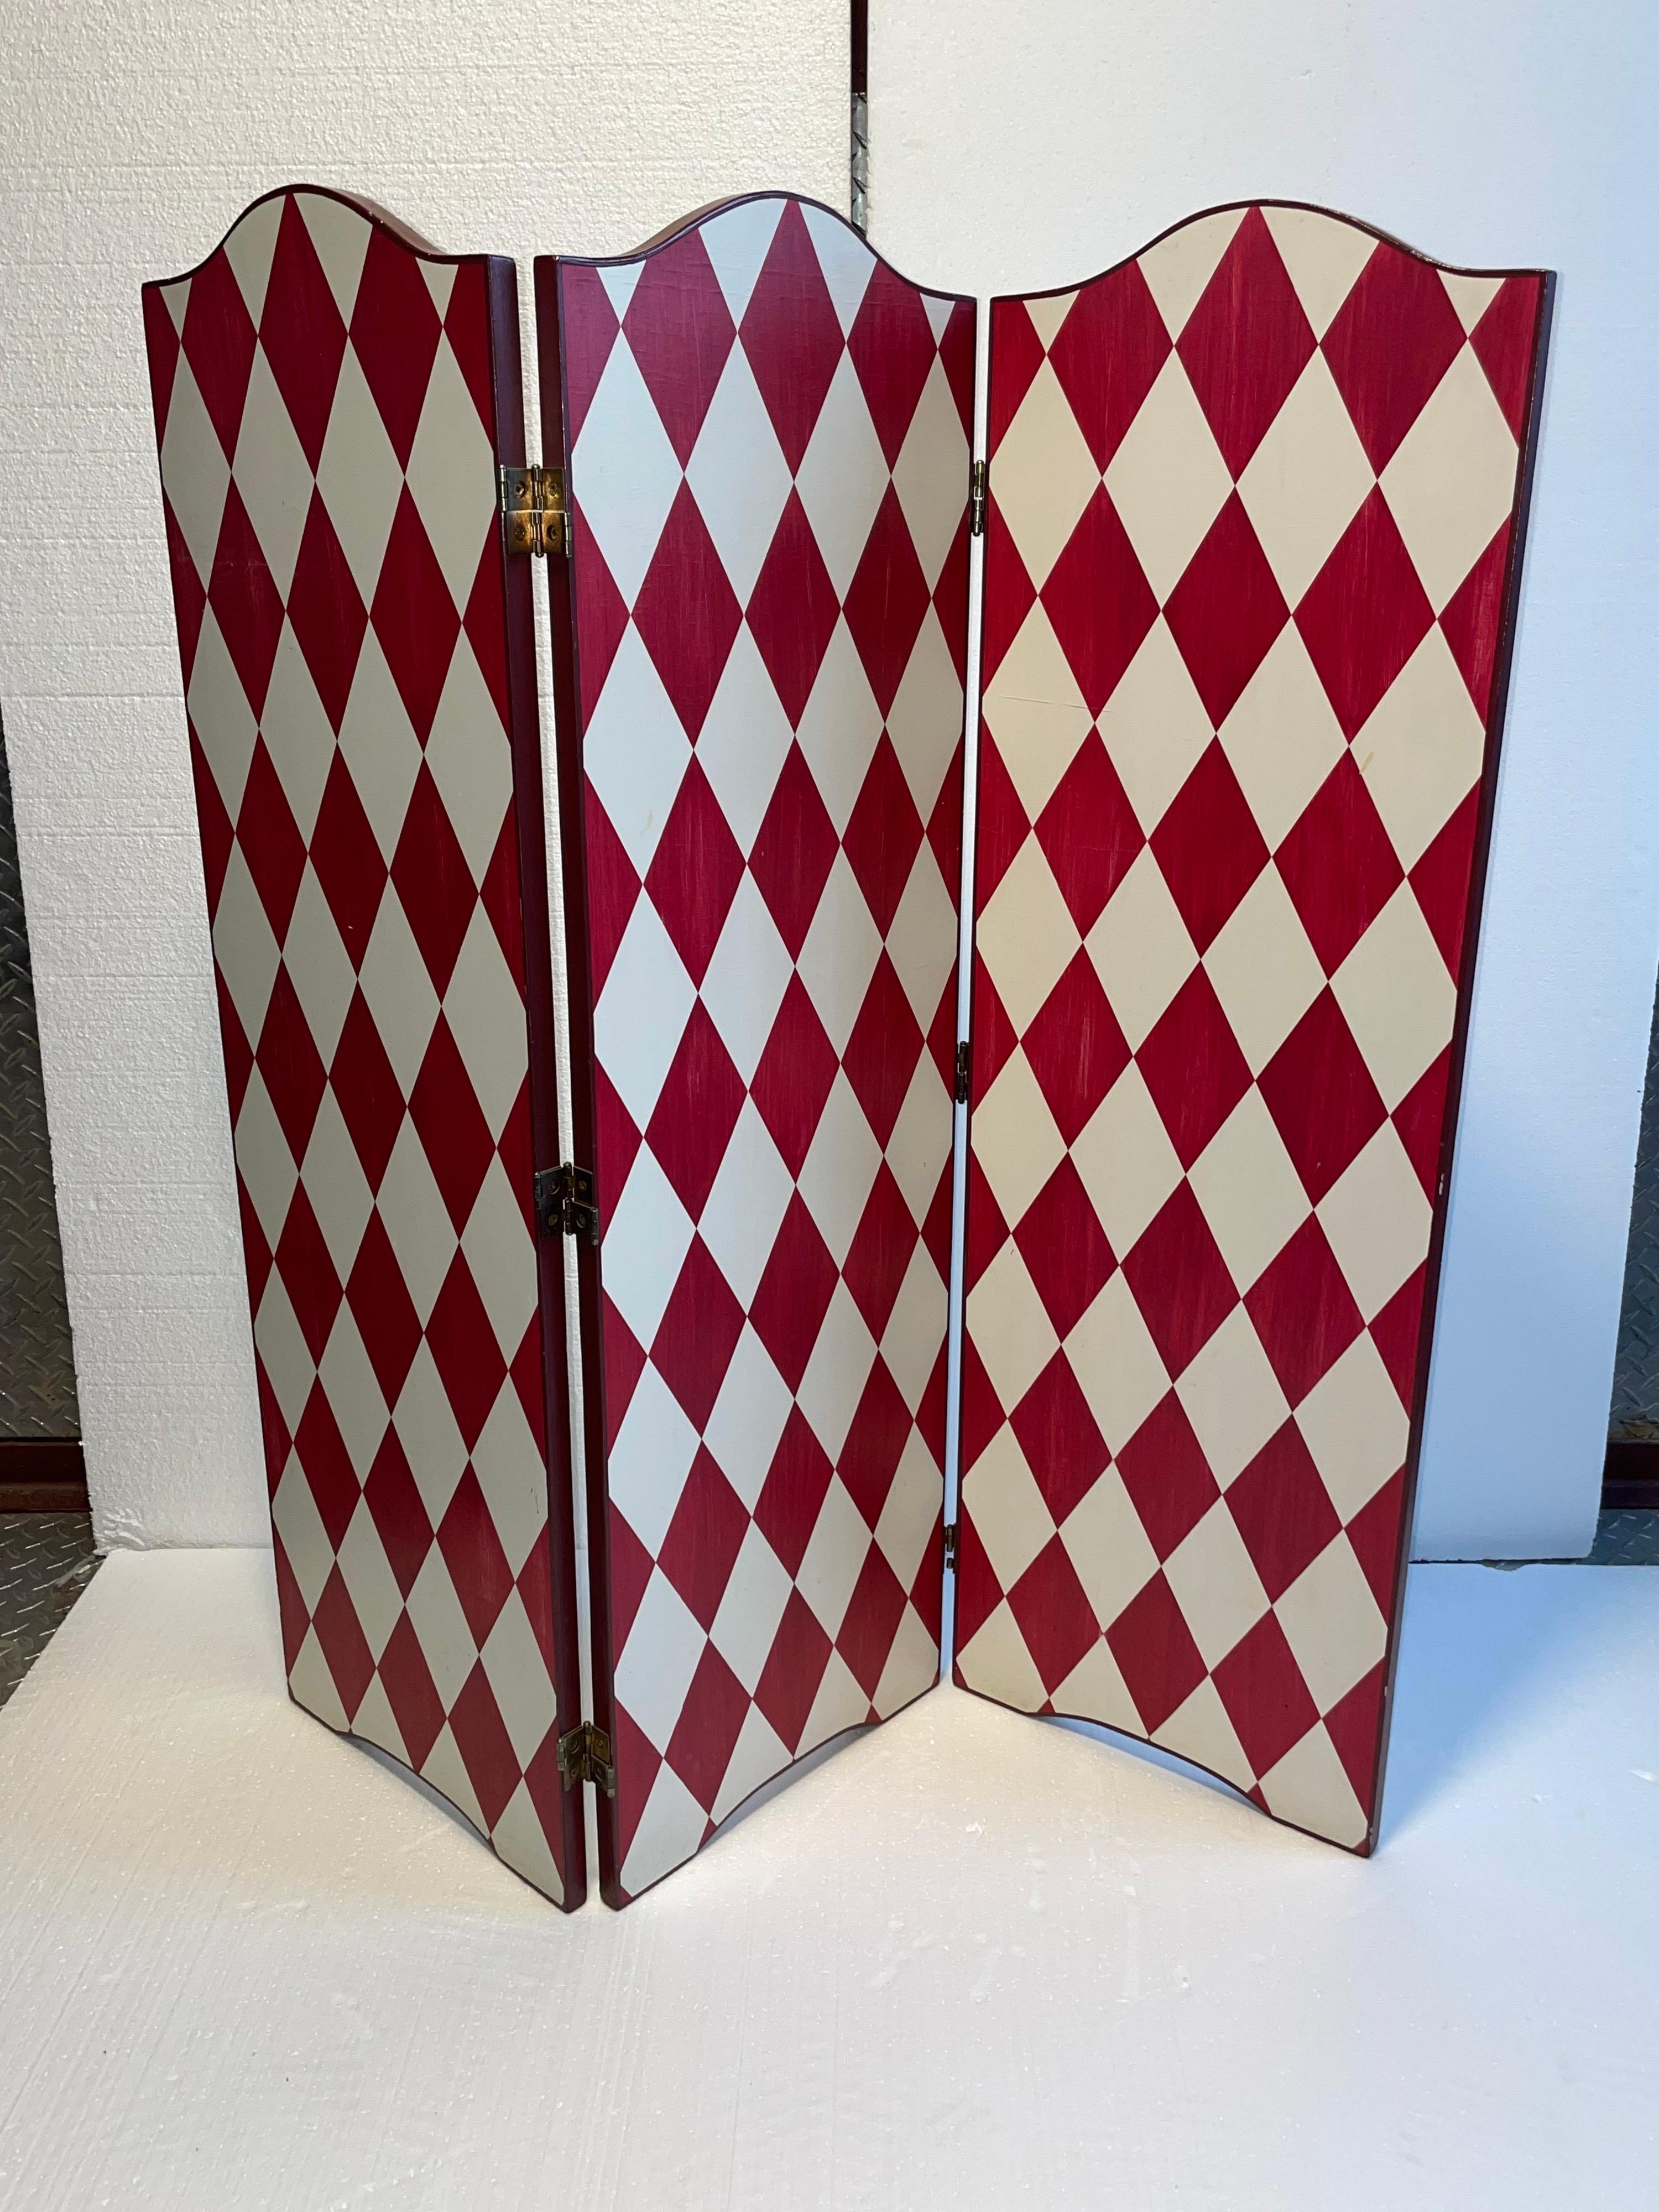 European Artistic Hand Painted French Screen Divider in a Festive White and Deep Red For Sale